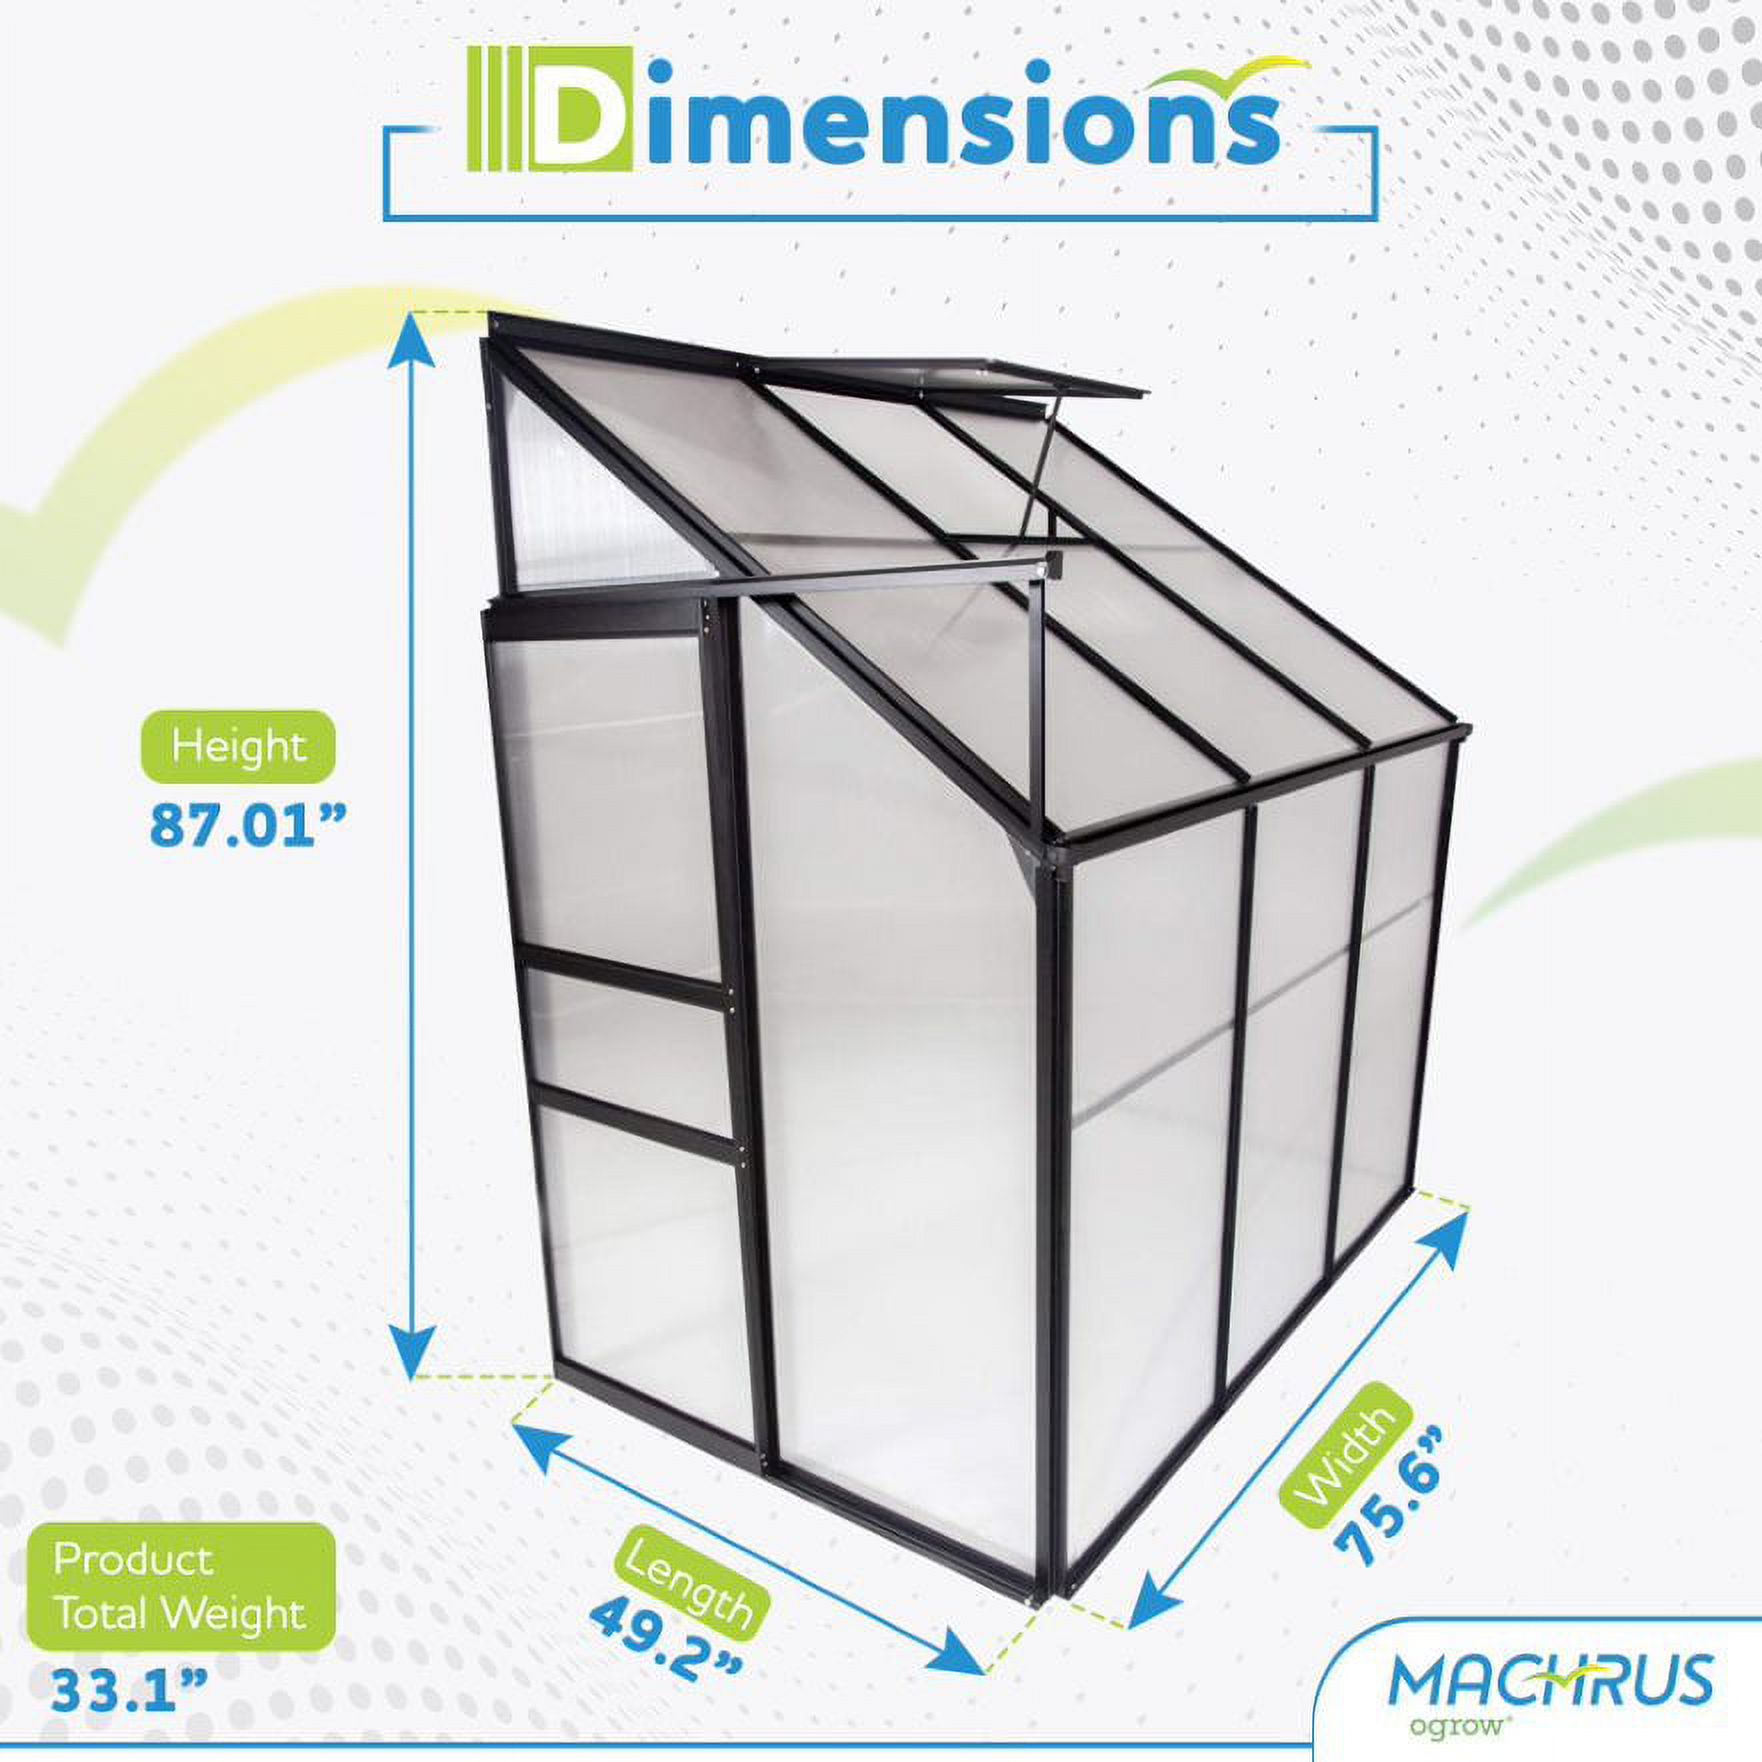 Machrus Ogrow 4 x 6 FT Lean-To-Wall Walk-In Greenhouse with Sliding Door and Adjustable Roof Vent - image 2 of 7